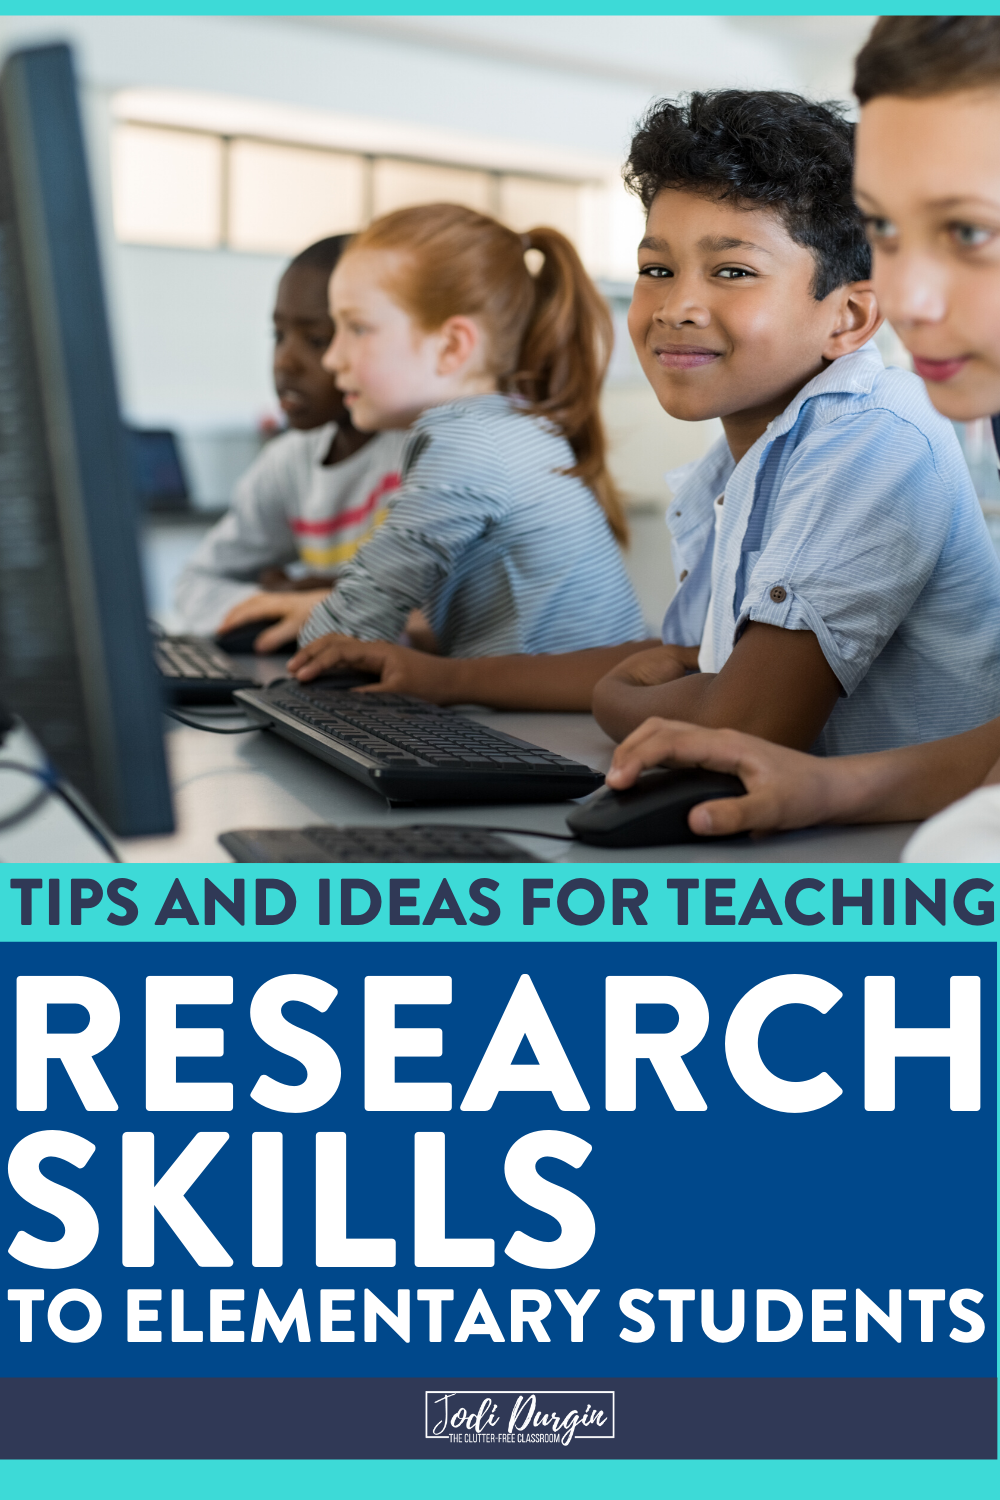 developing research skills in students